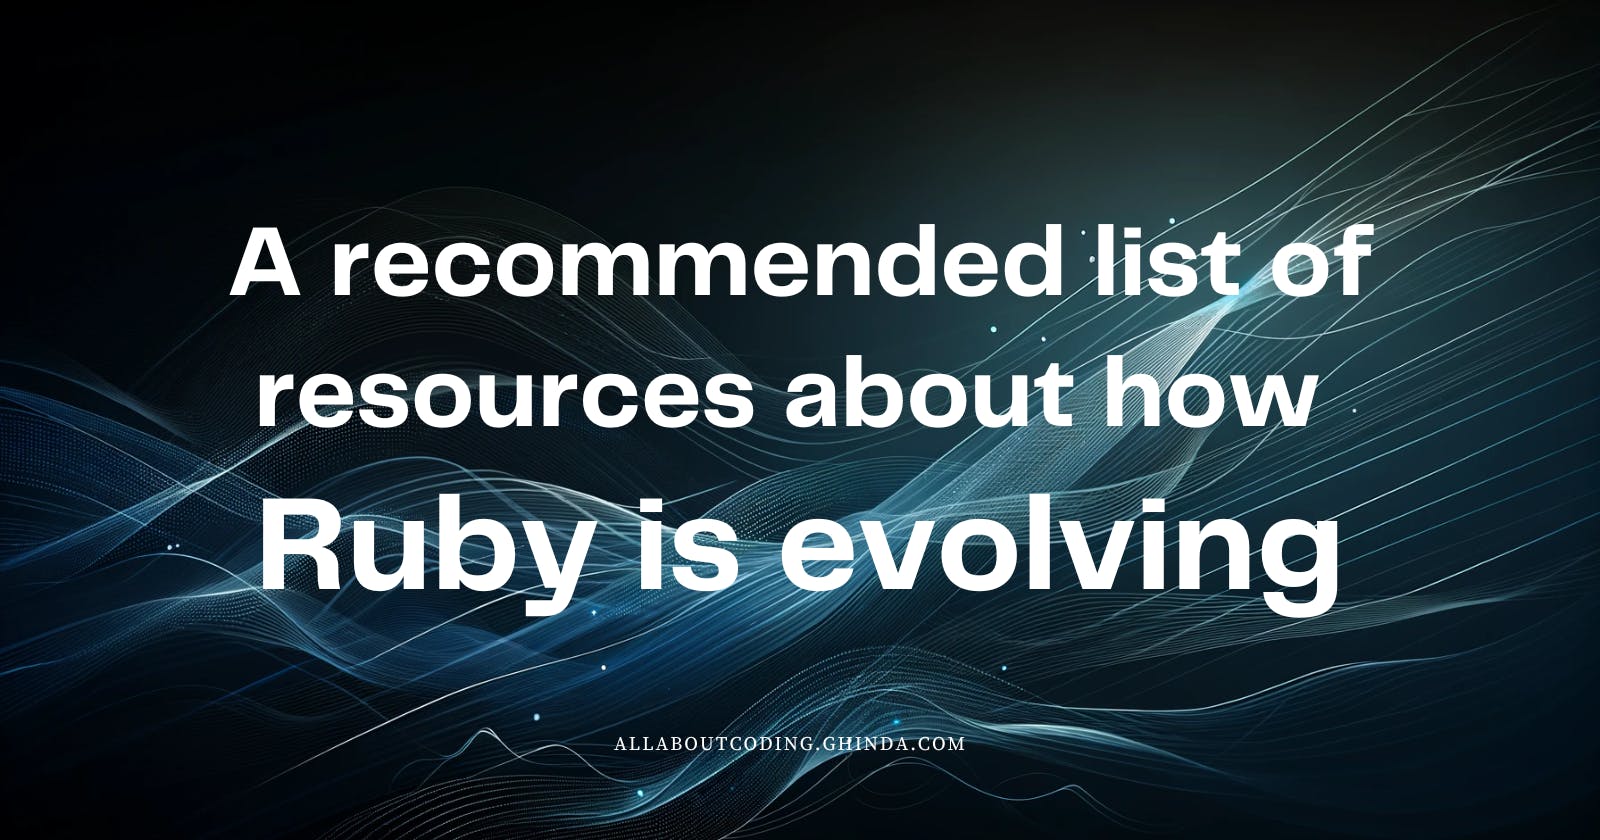 A recommended list of resources about how Ruby is evolving